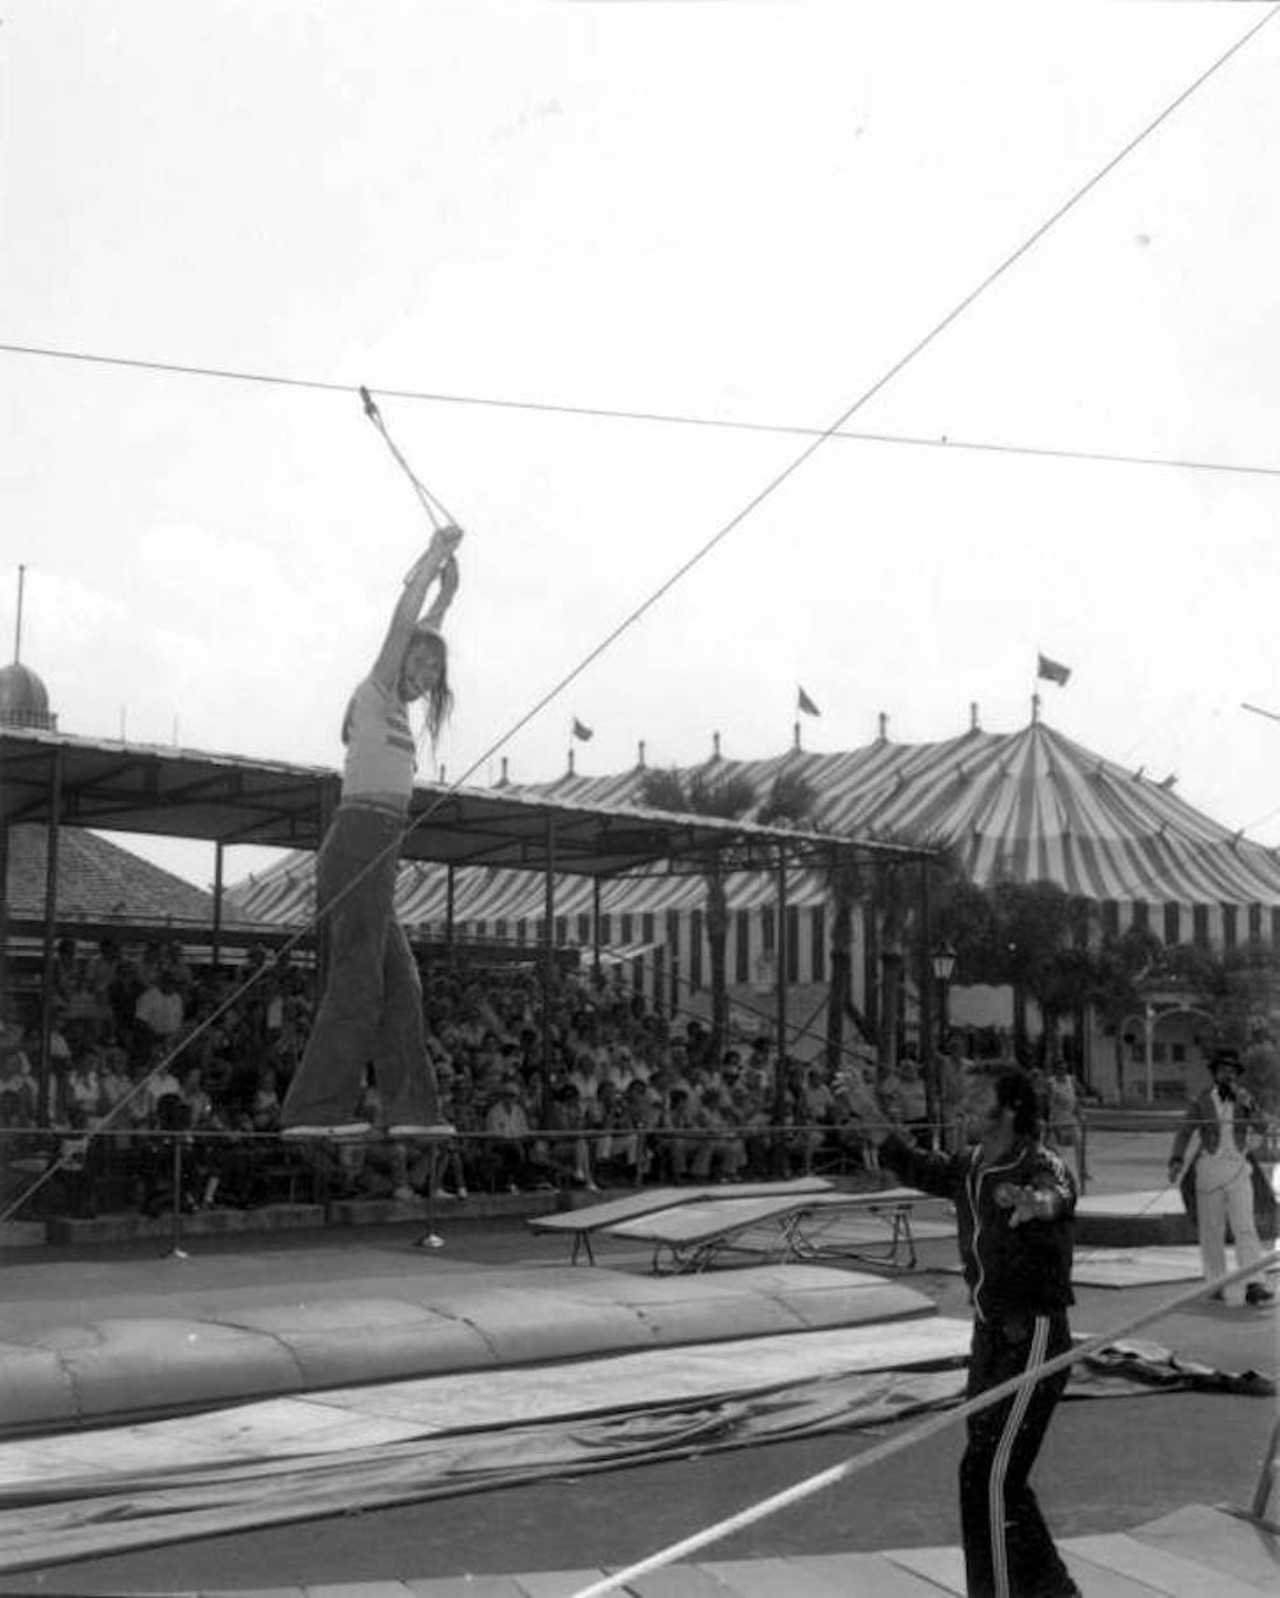 Let's remember the shuttered Orlando theme park Circus World